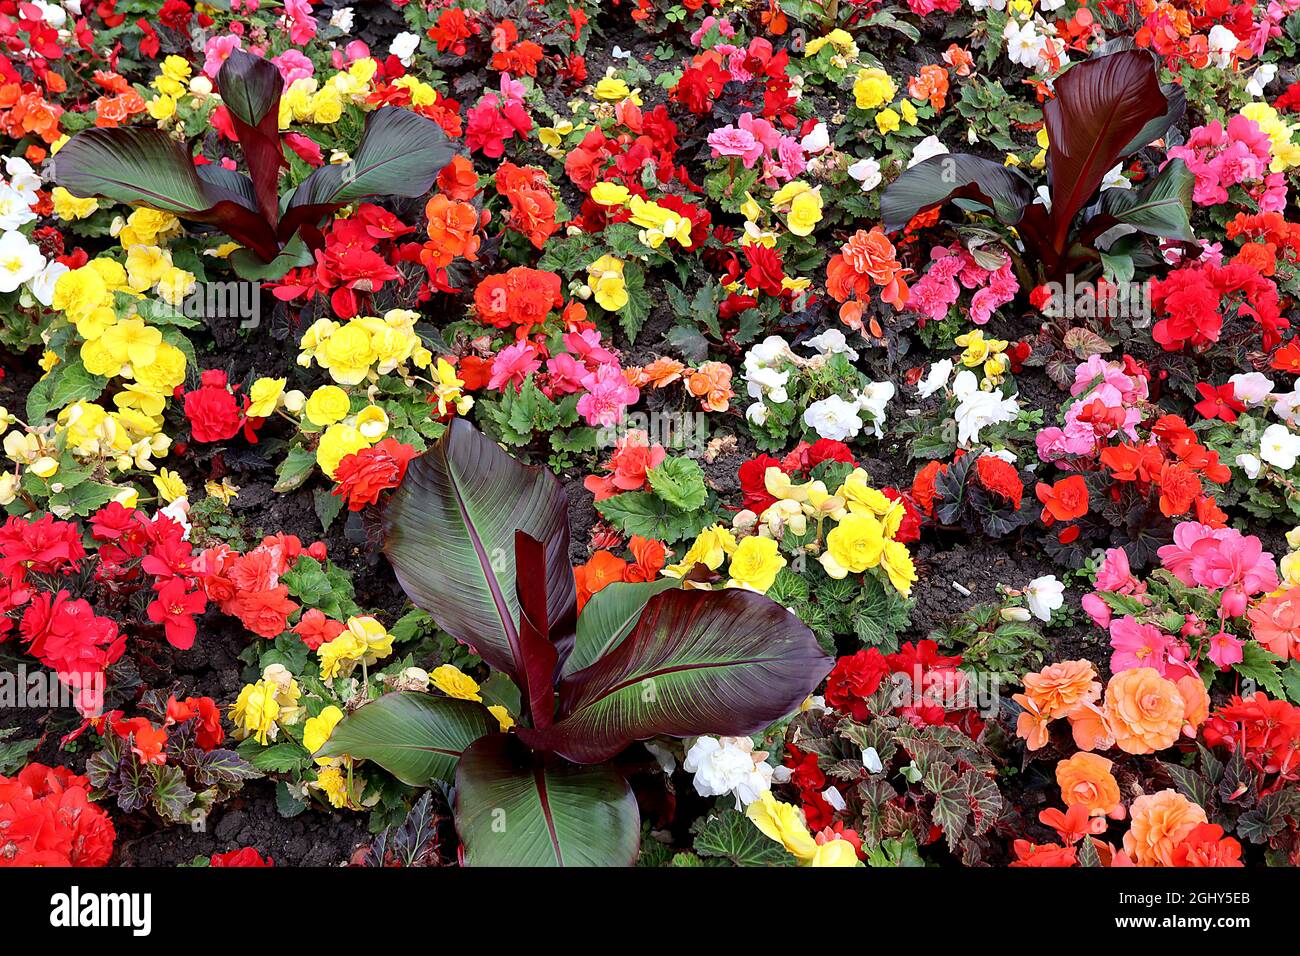 Begonia tuberosa 'NonStop Mix' double white, yellow, orange, pink and red  flowers with angel wing shaped leaves, August, England, UK Stock Photo -  Alamy